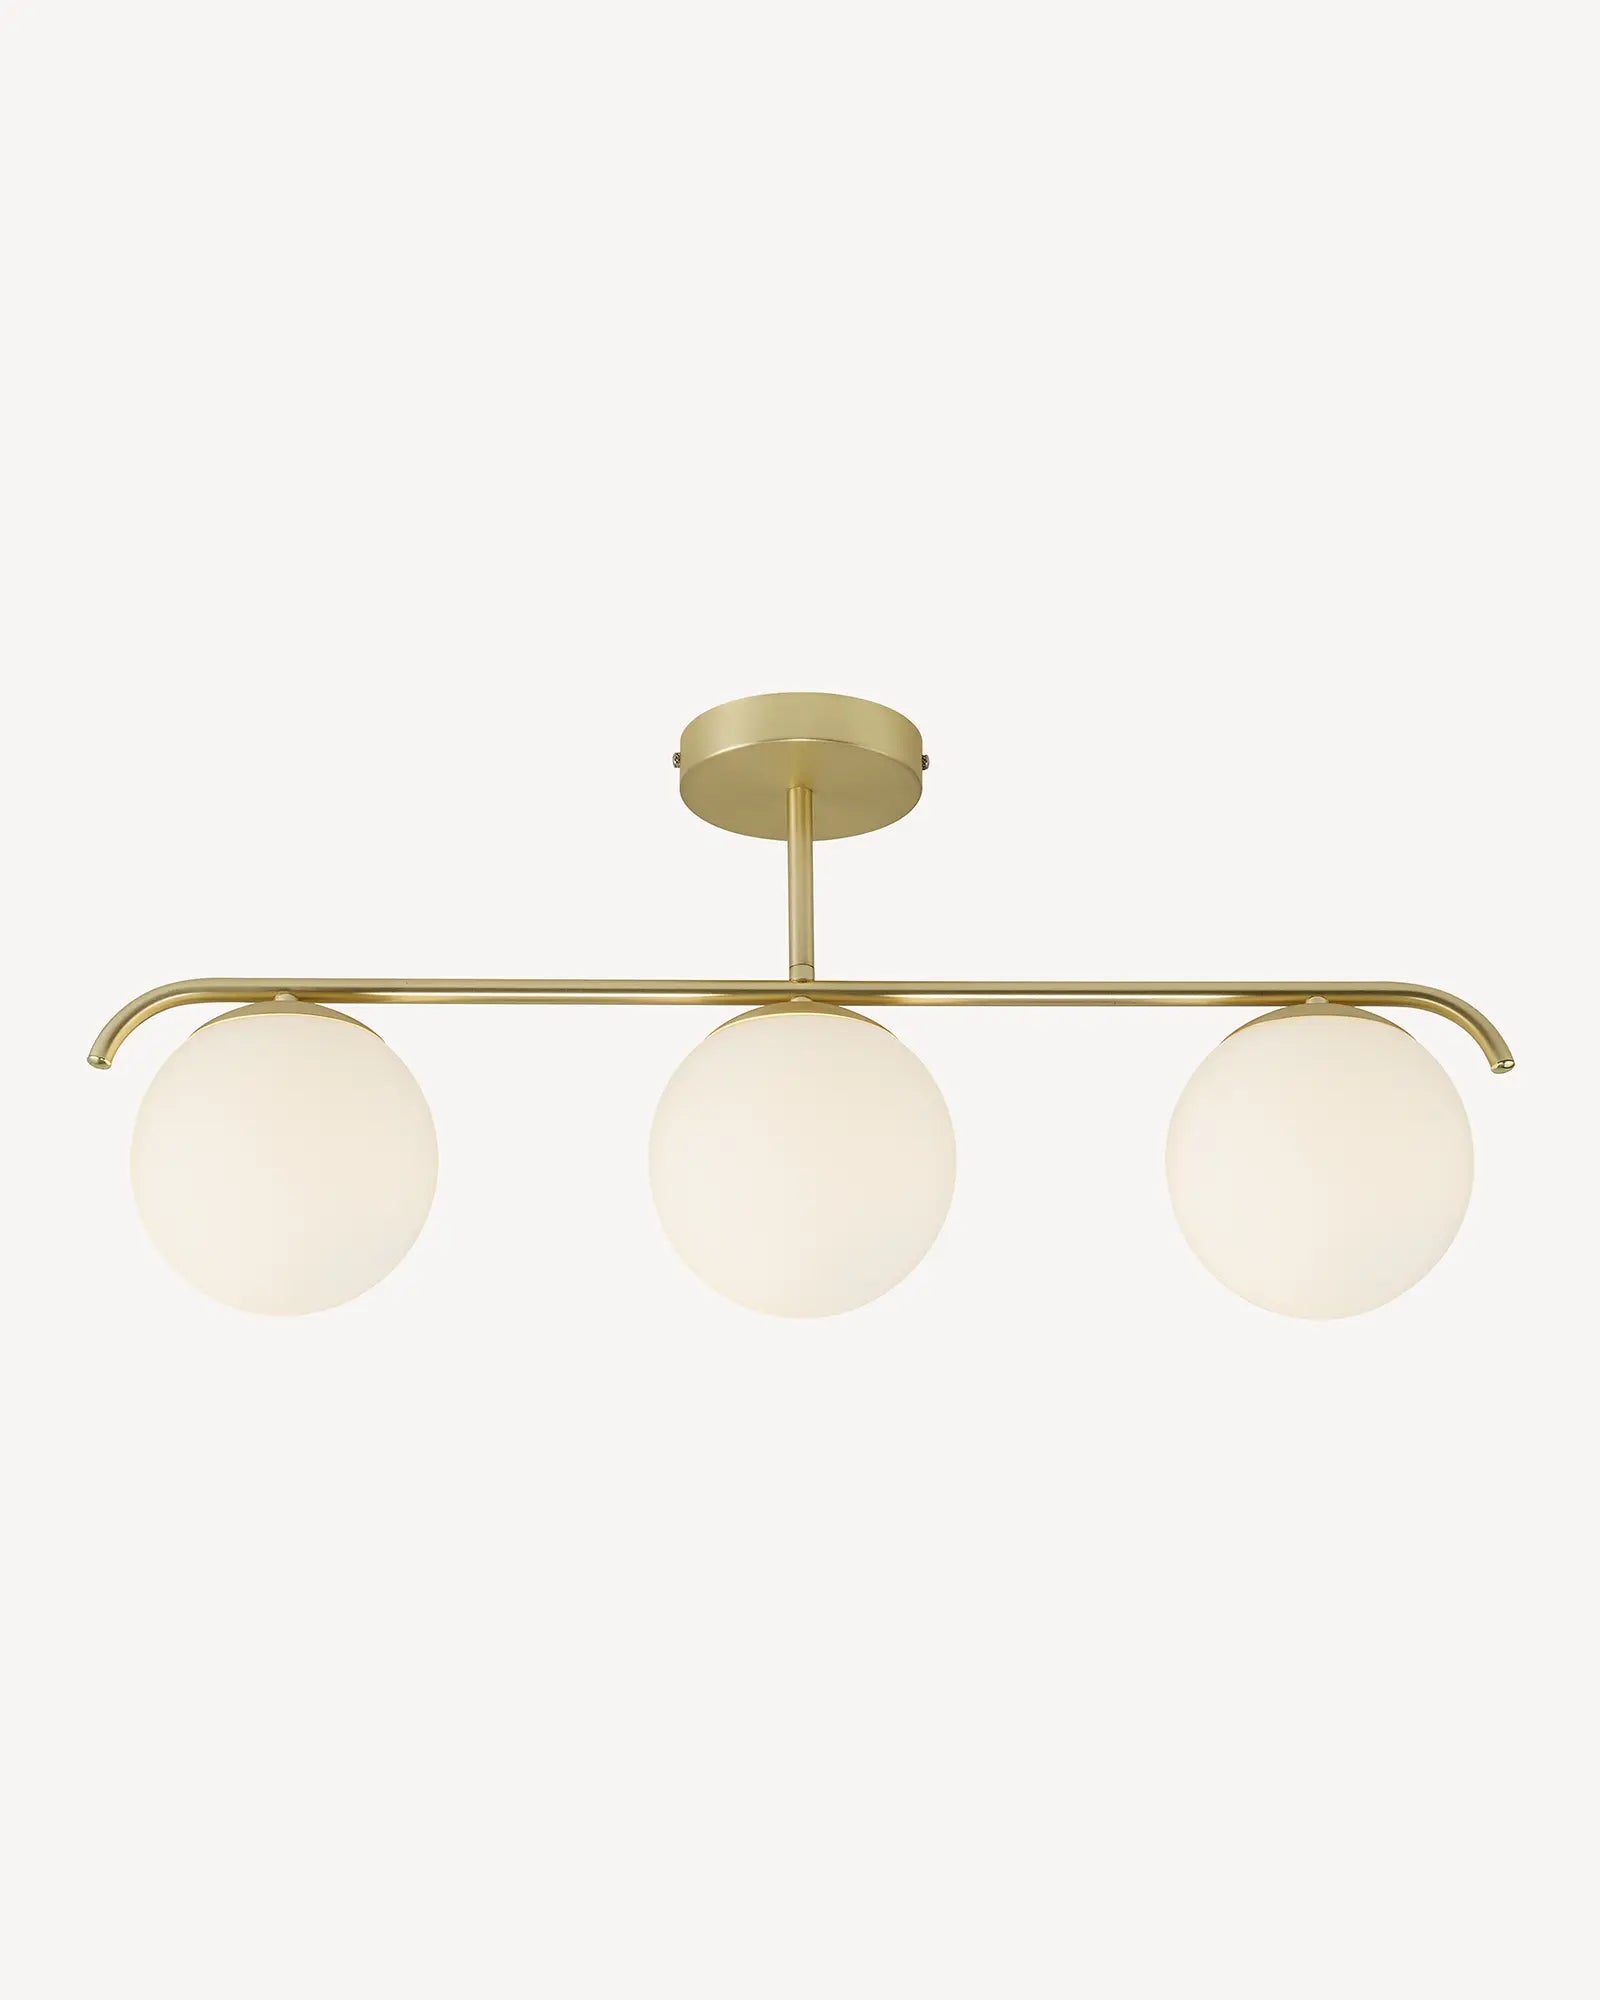 Grant orb pendant light in opal and brass 3 lights